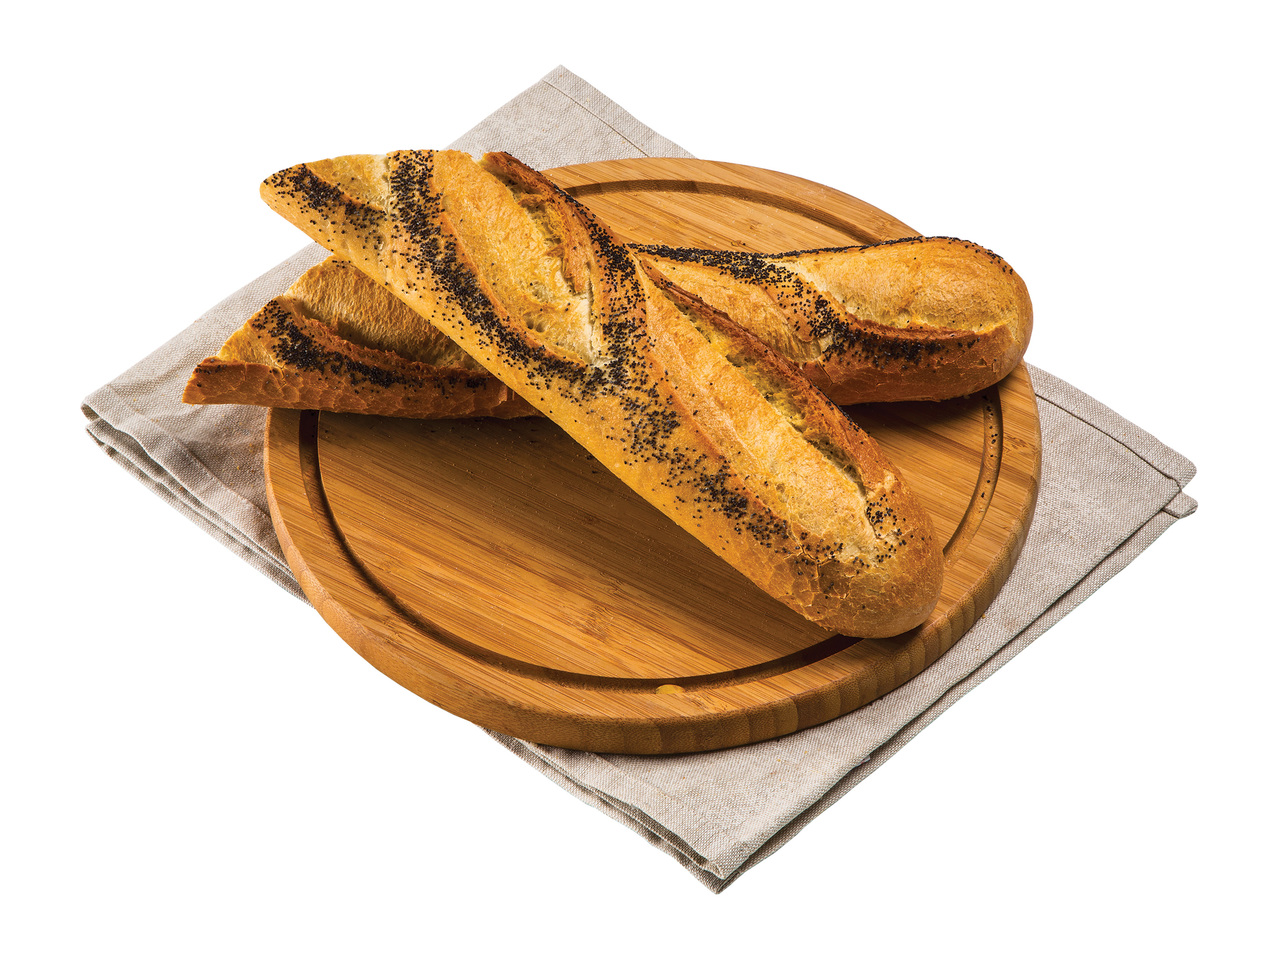 FRENCH STYLE POPPY SEEDED BAGUETTE